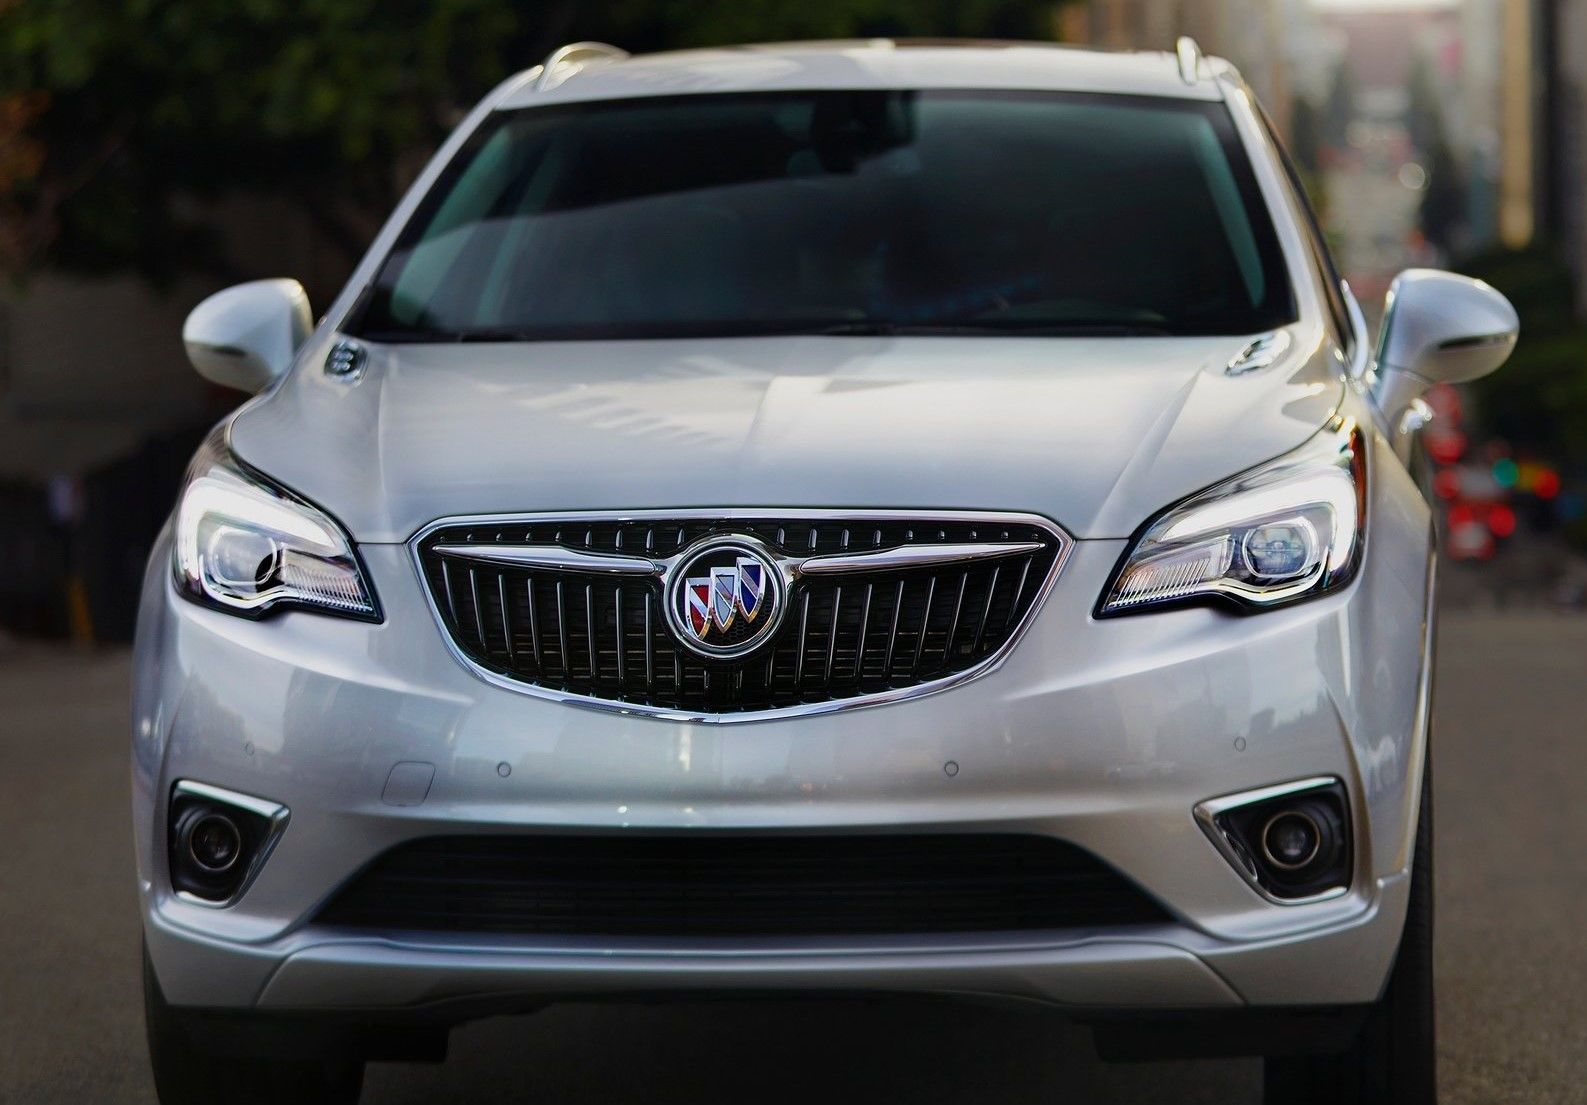 2019 Buick Envision: Not Your Typical Luxury SUV